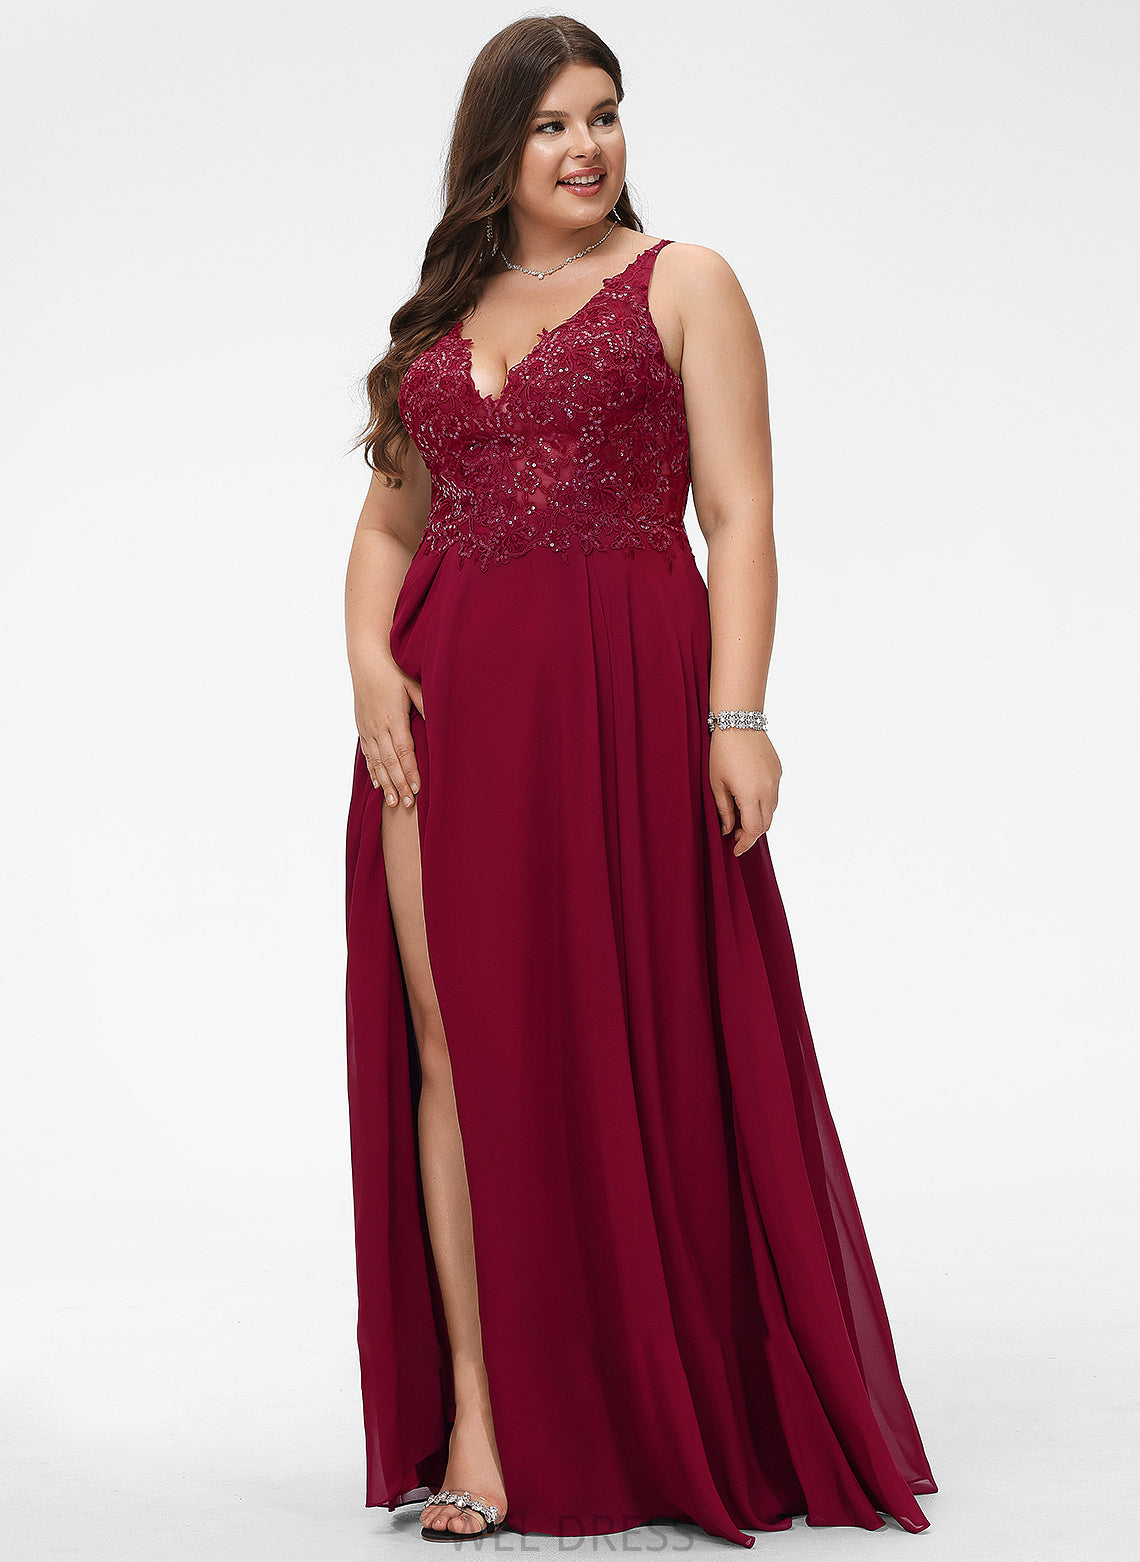 Lace Rubi Sequins Front With A-Line Floor-Length Prom Dresses Chiffon V-neck Split